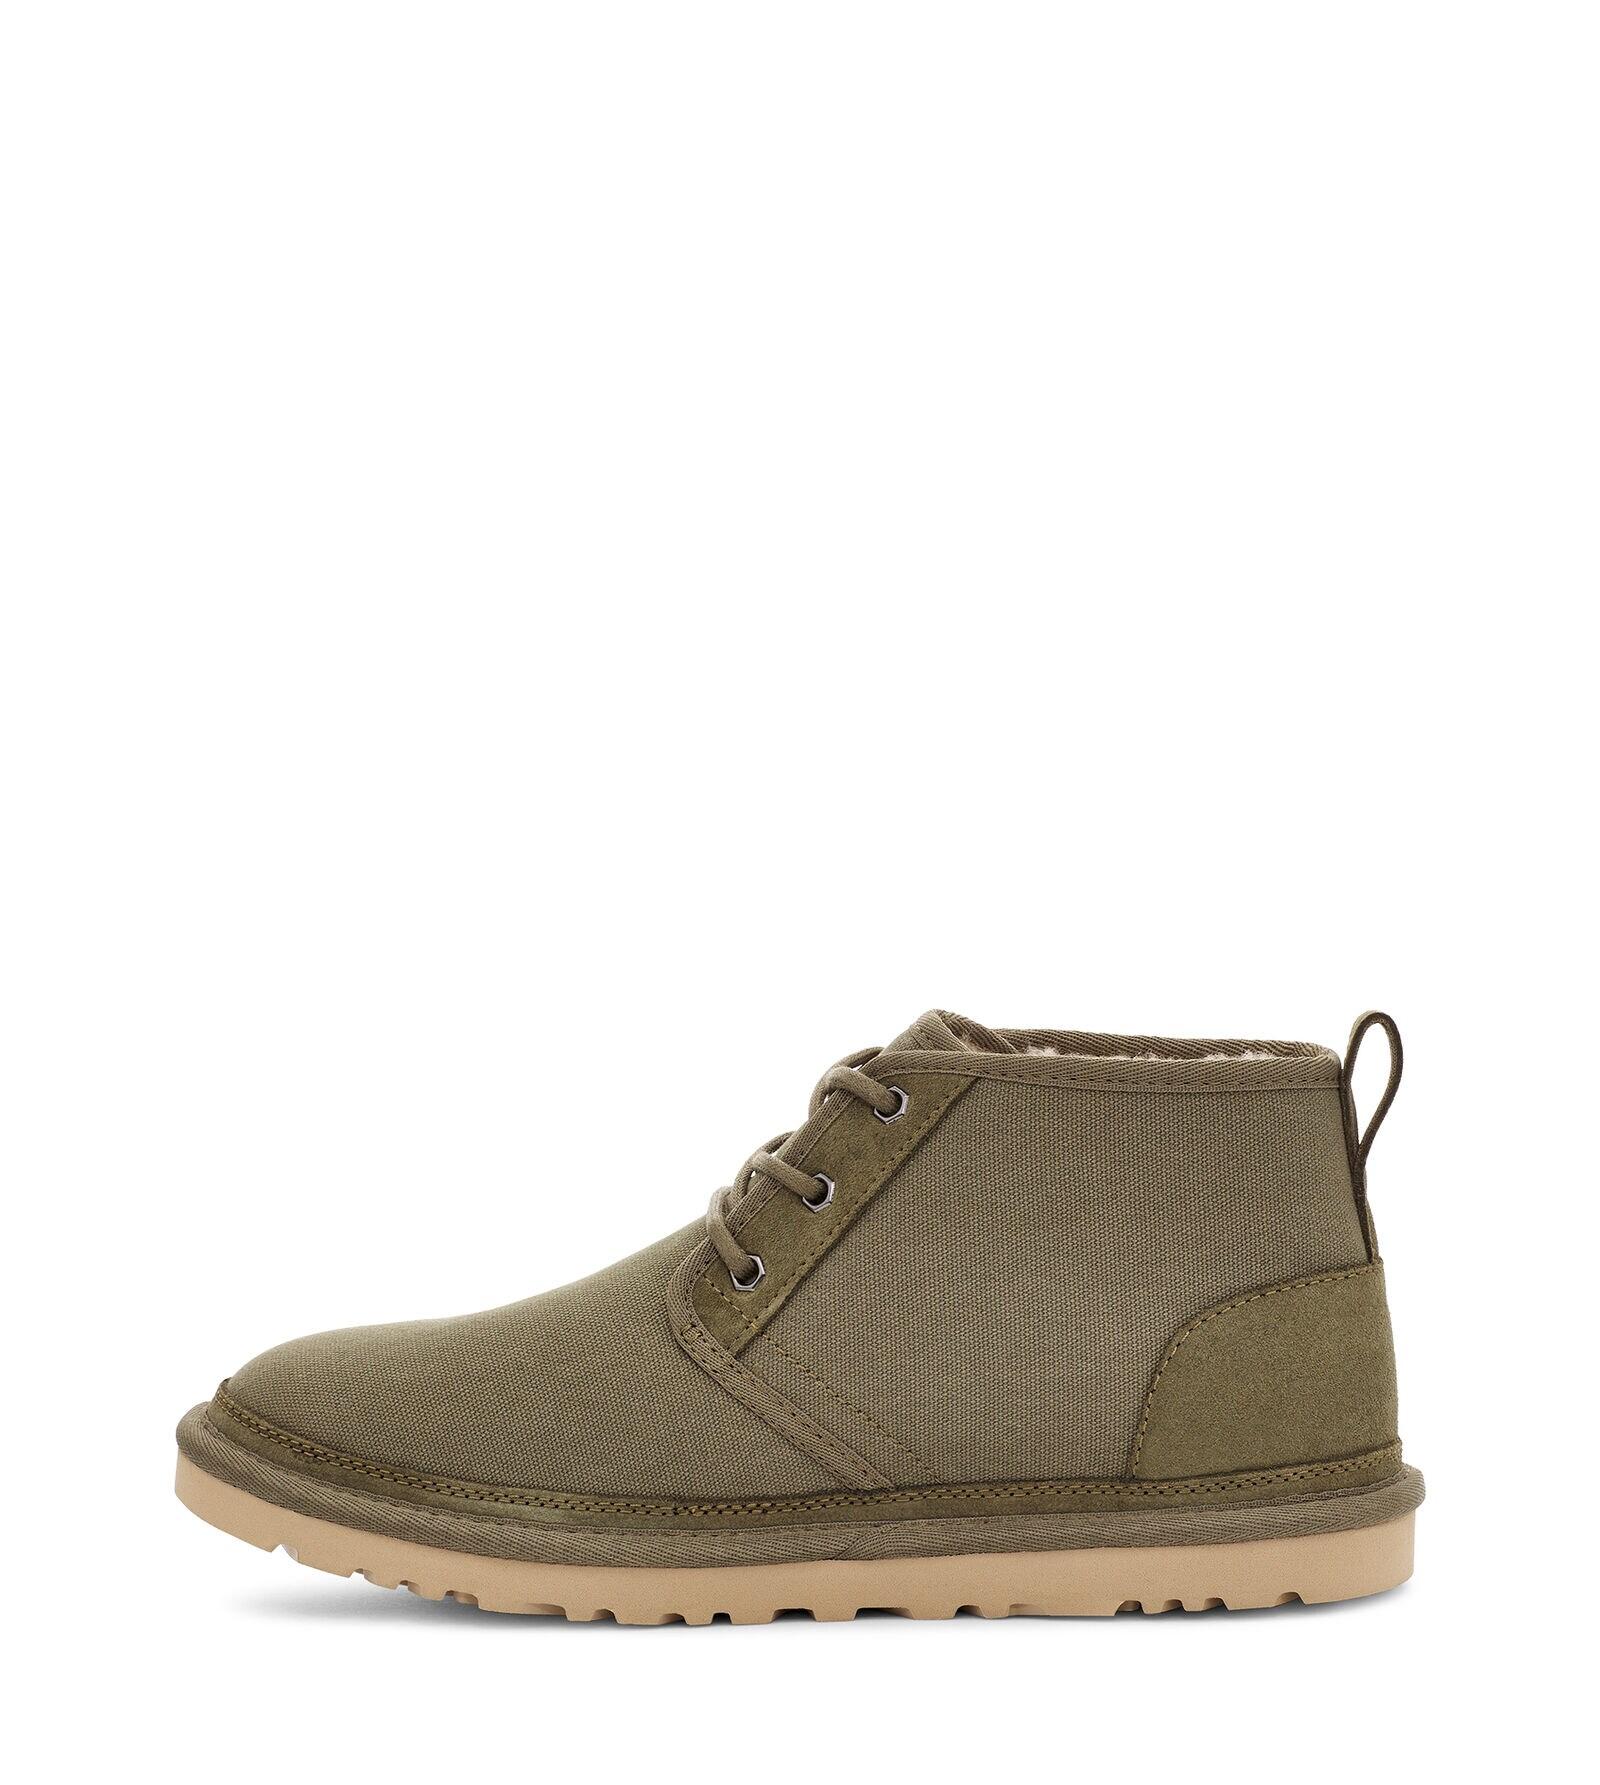 UGG Neumel Canvas Boot in Moss Green (Green) for Men - Lyst